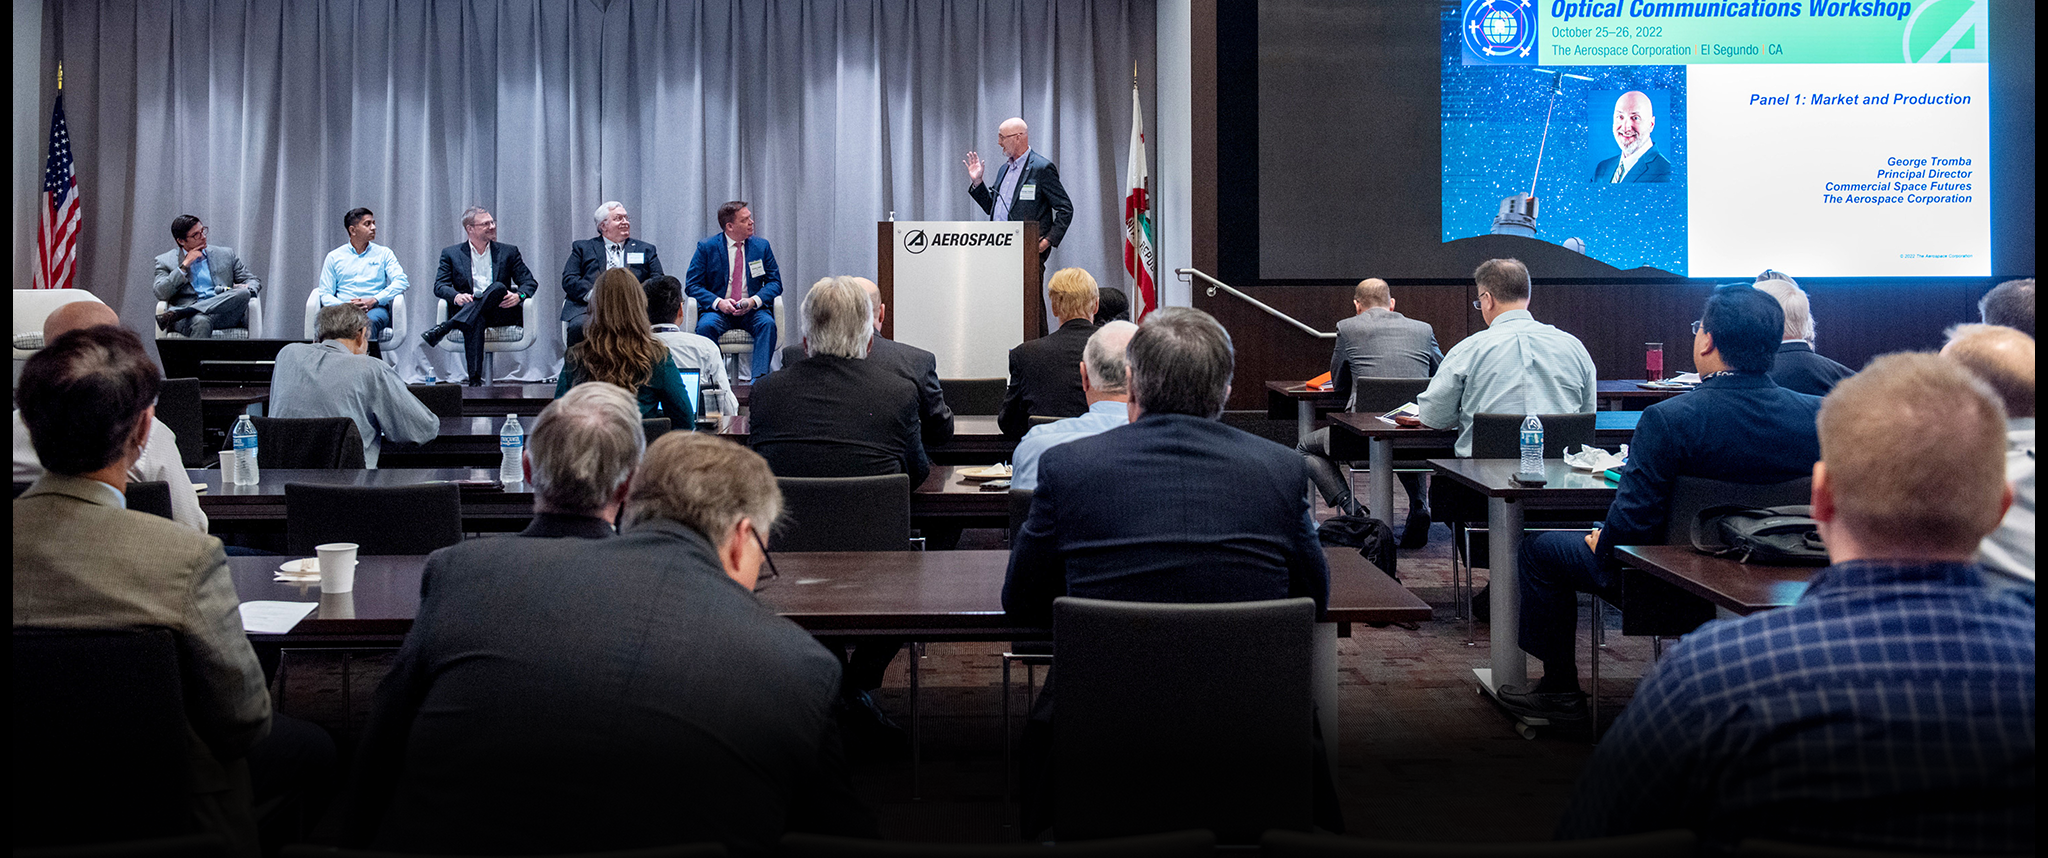 Throughout the year, Aerospace hosts various events to bring together government and commercial partners to advance impactful capabilities that shape the future of space.